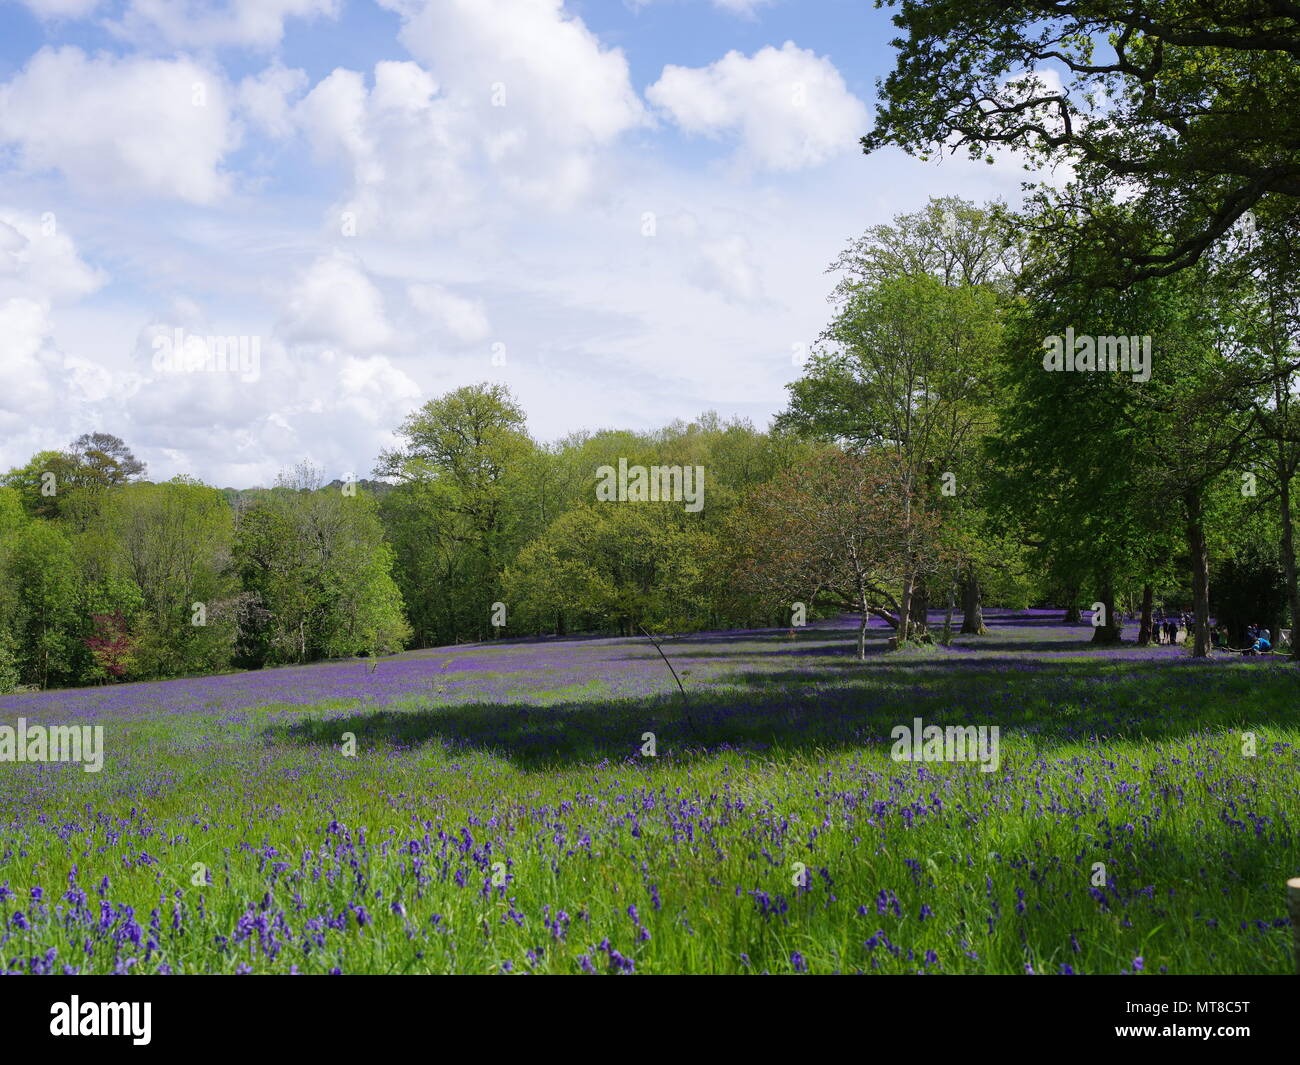 Woodland field of bluebells creating a carpet of blue, under the shade of the trees, a country scene at Enys Gardens, Cornwall. Stock Photo